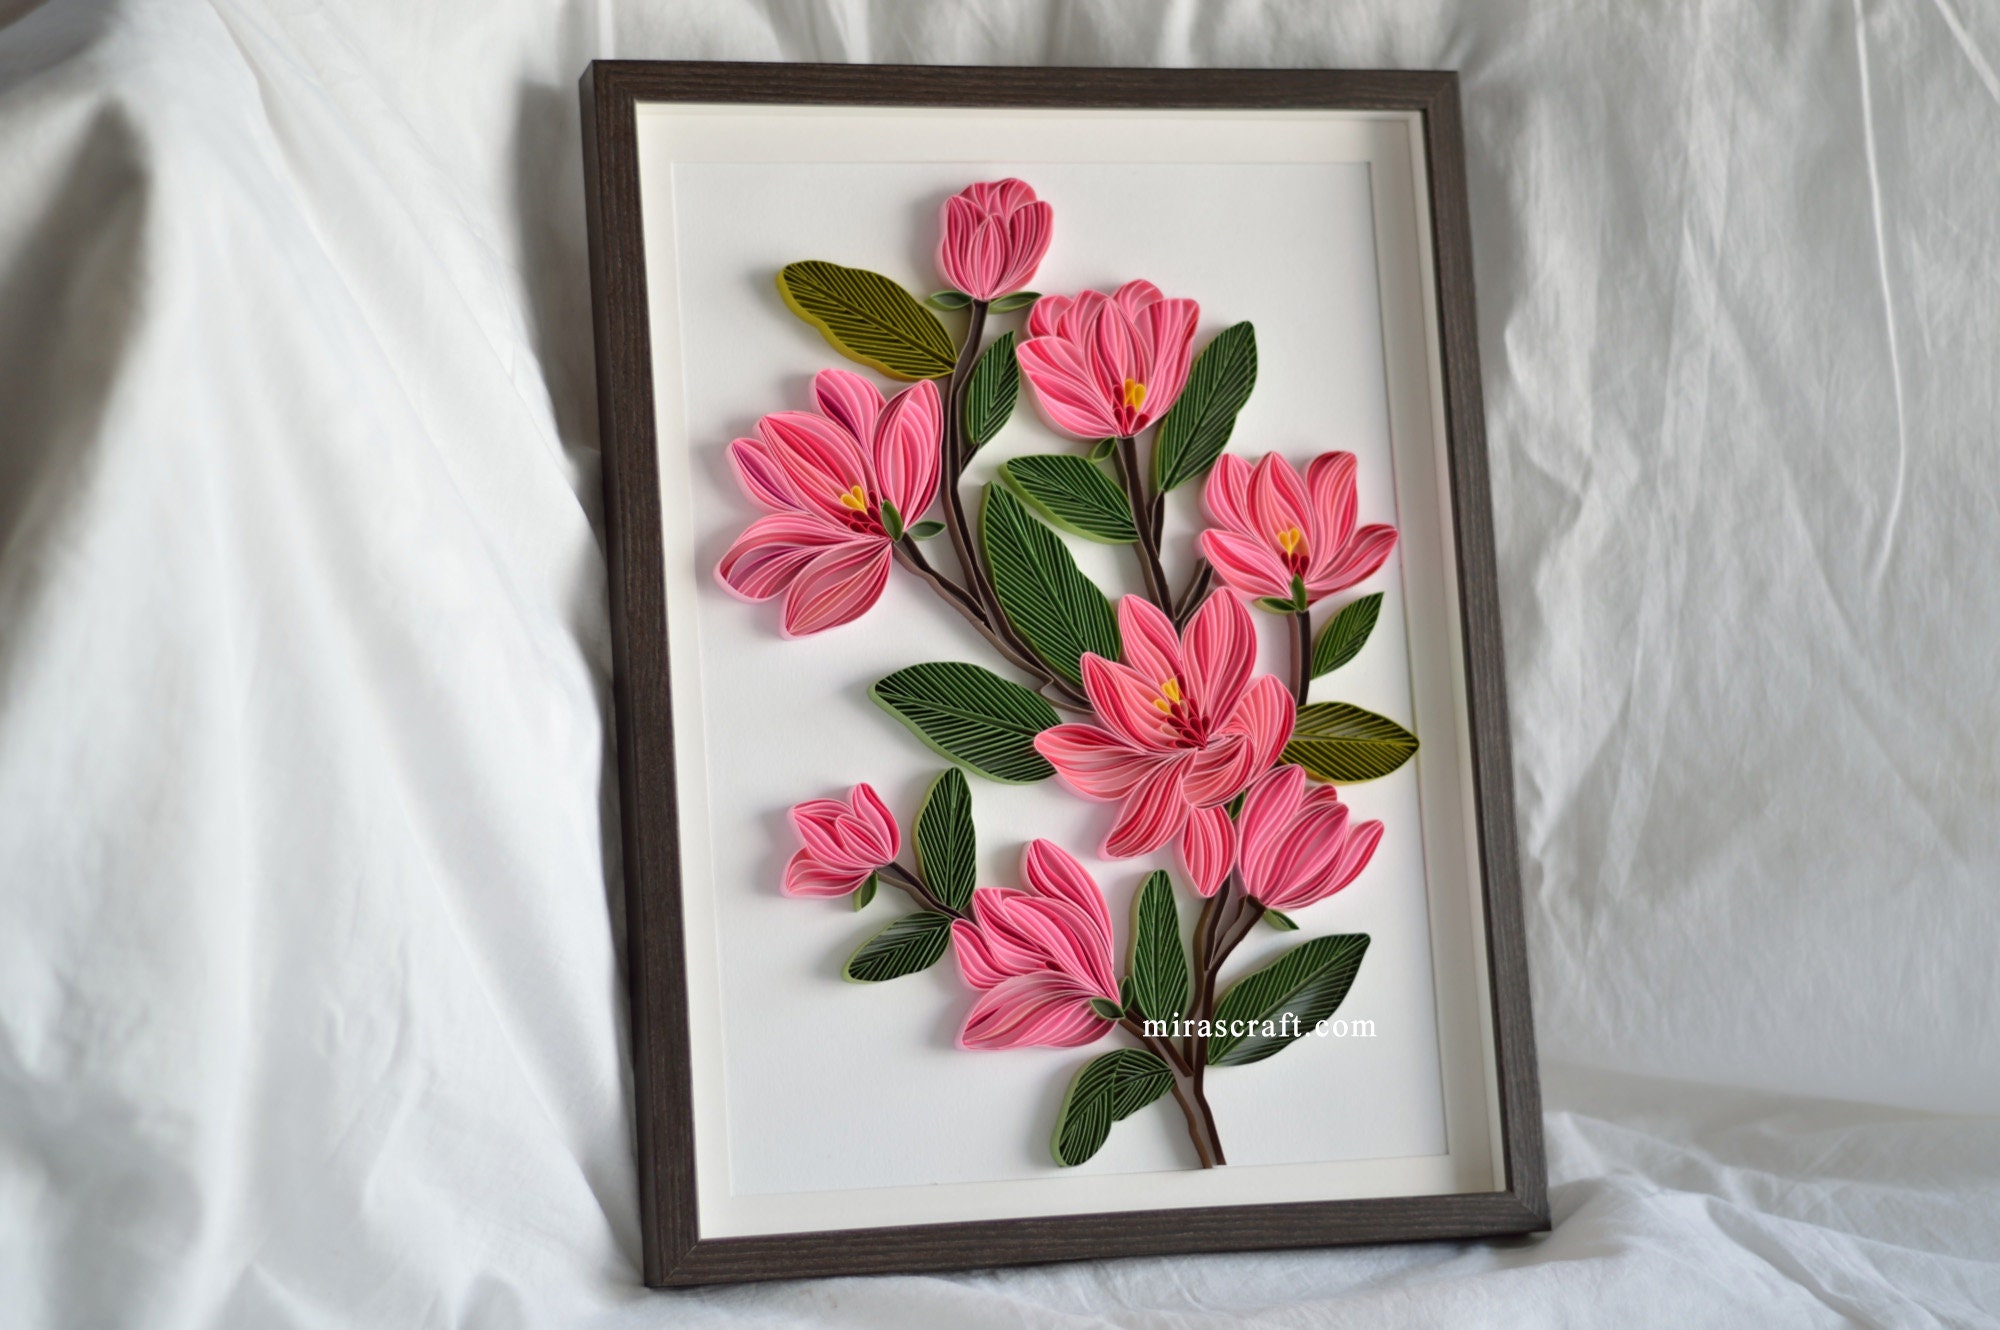 Paper Quilled Magnolia Flowers that I made! : r/quilling